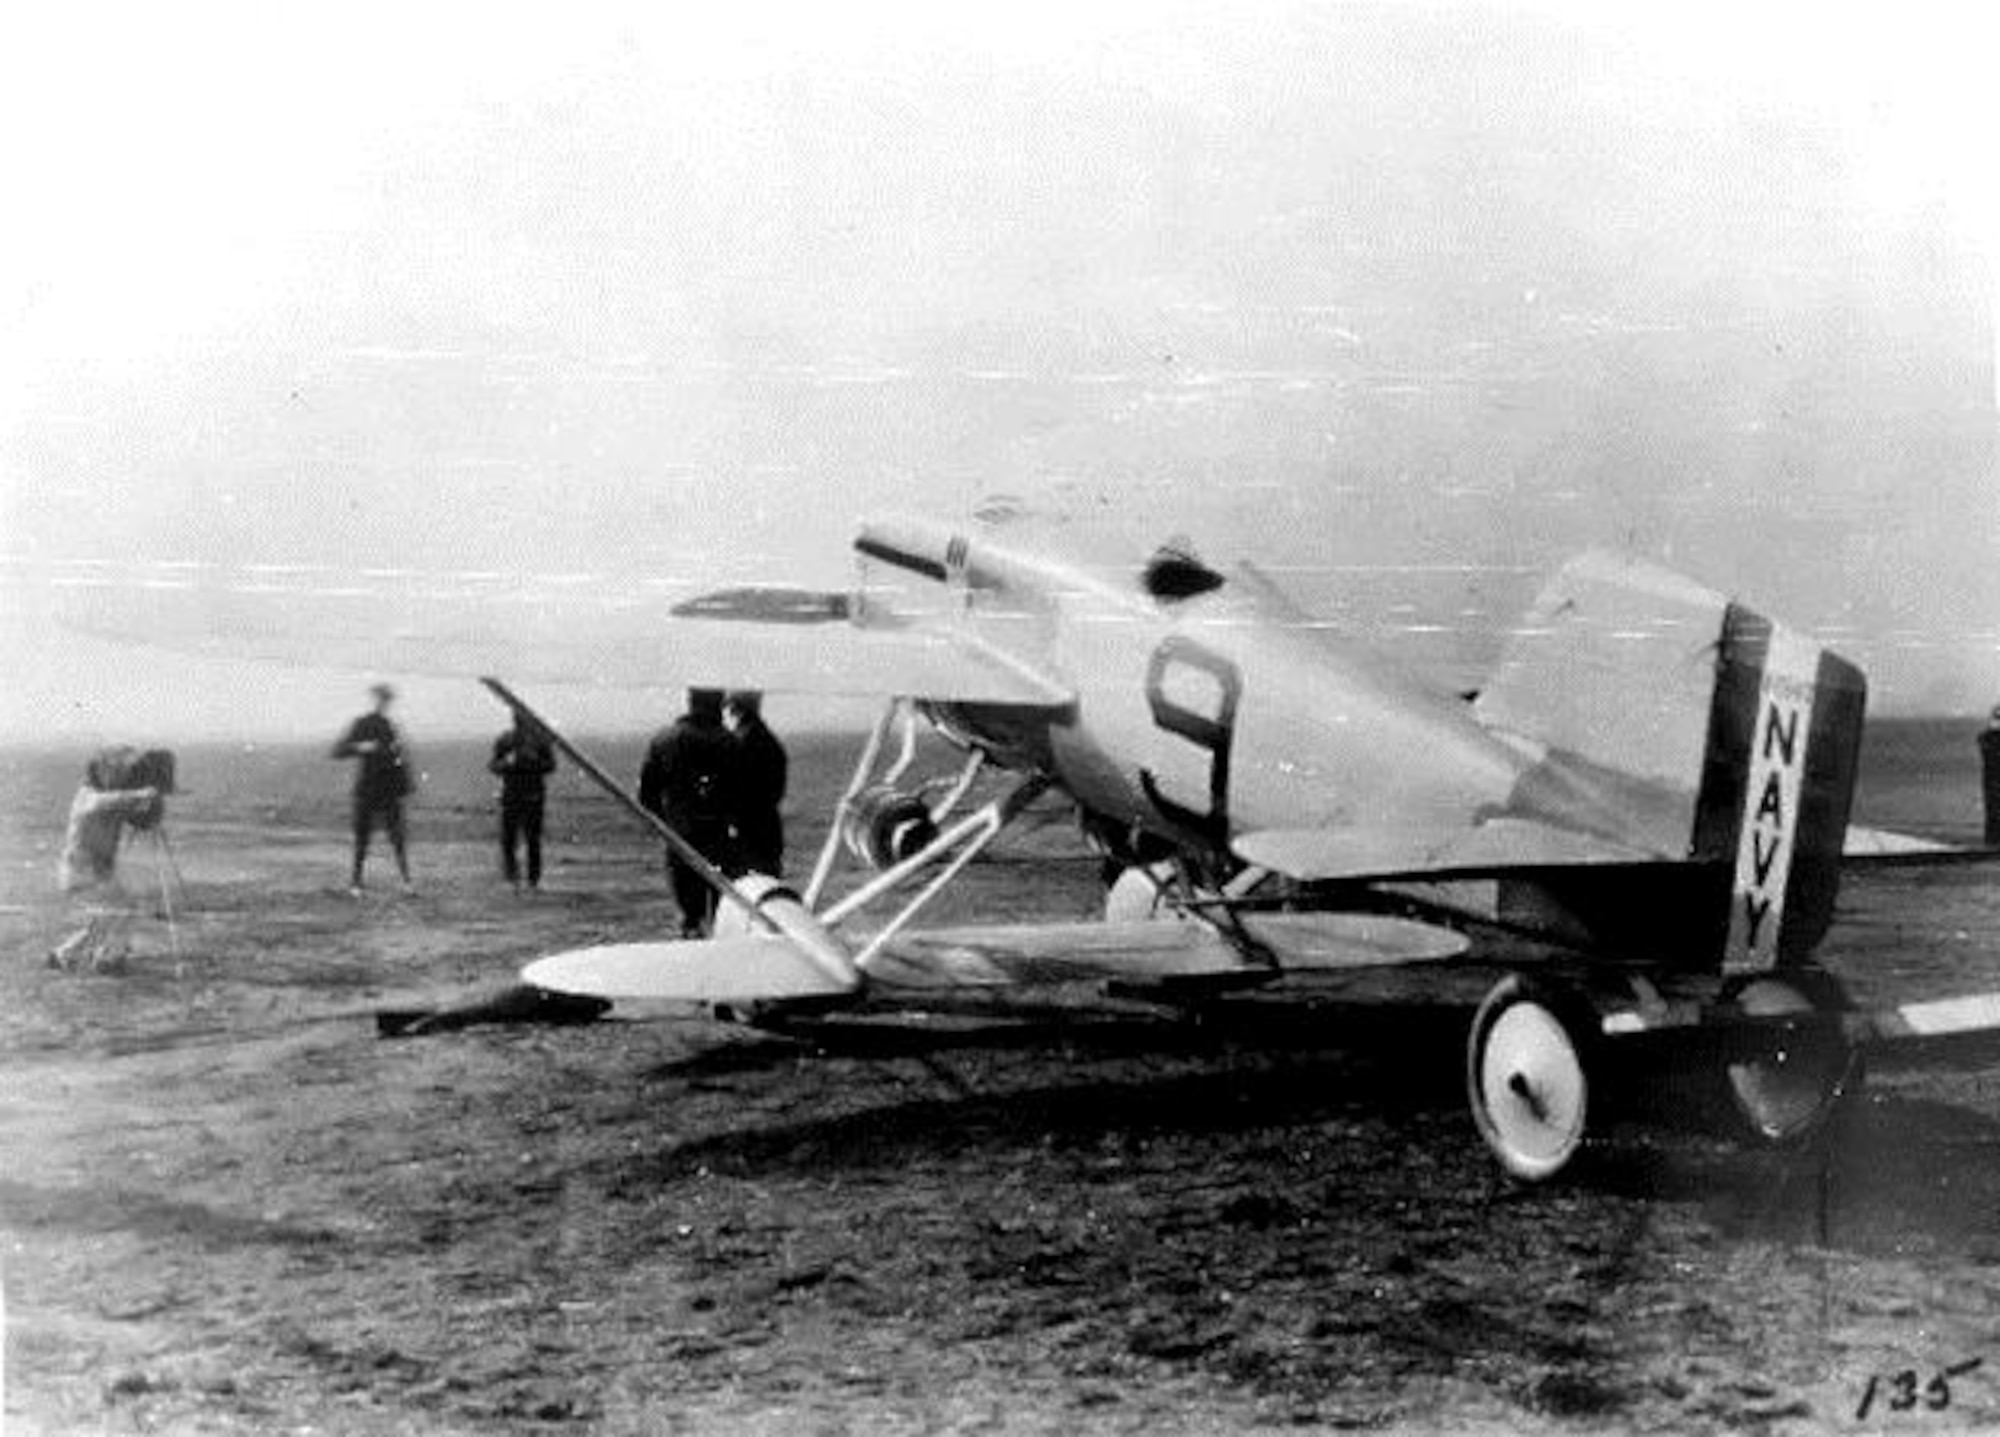 This rear view of the NW-1 clearly shows the difference in span of the sesquiplane’s wings. Note the Lamblin radiator supported by the gear struts. The aircraft was first put to use in a test flight at Selfridge Field in October 1922. (U.S. Navy photo)